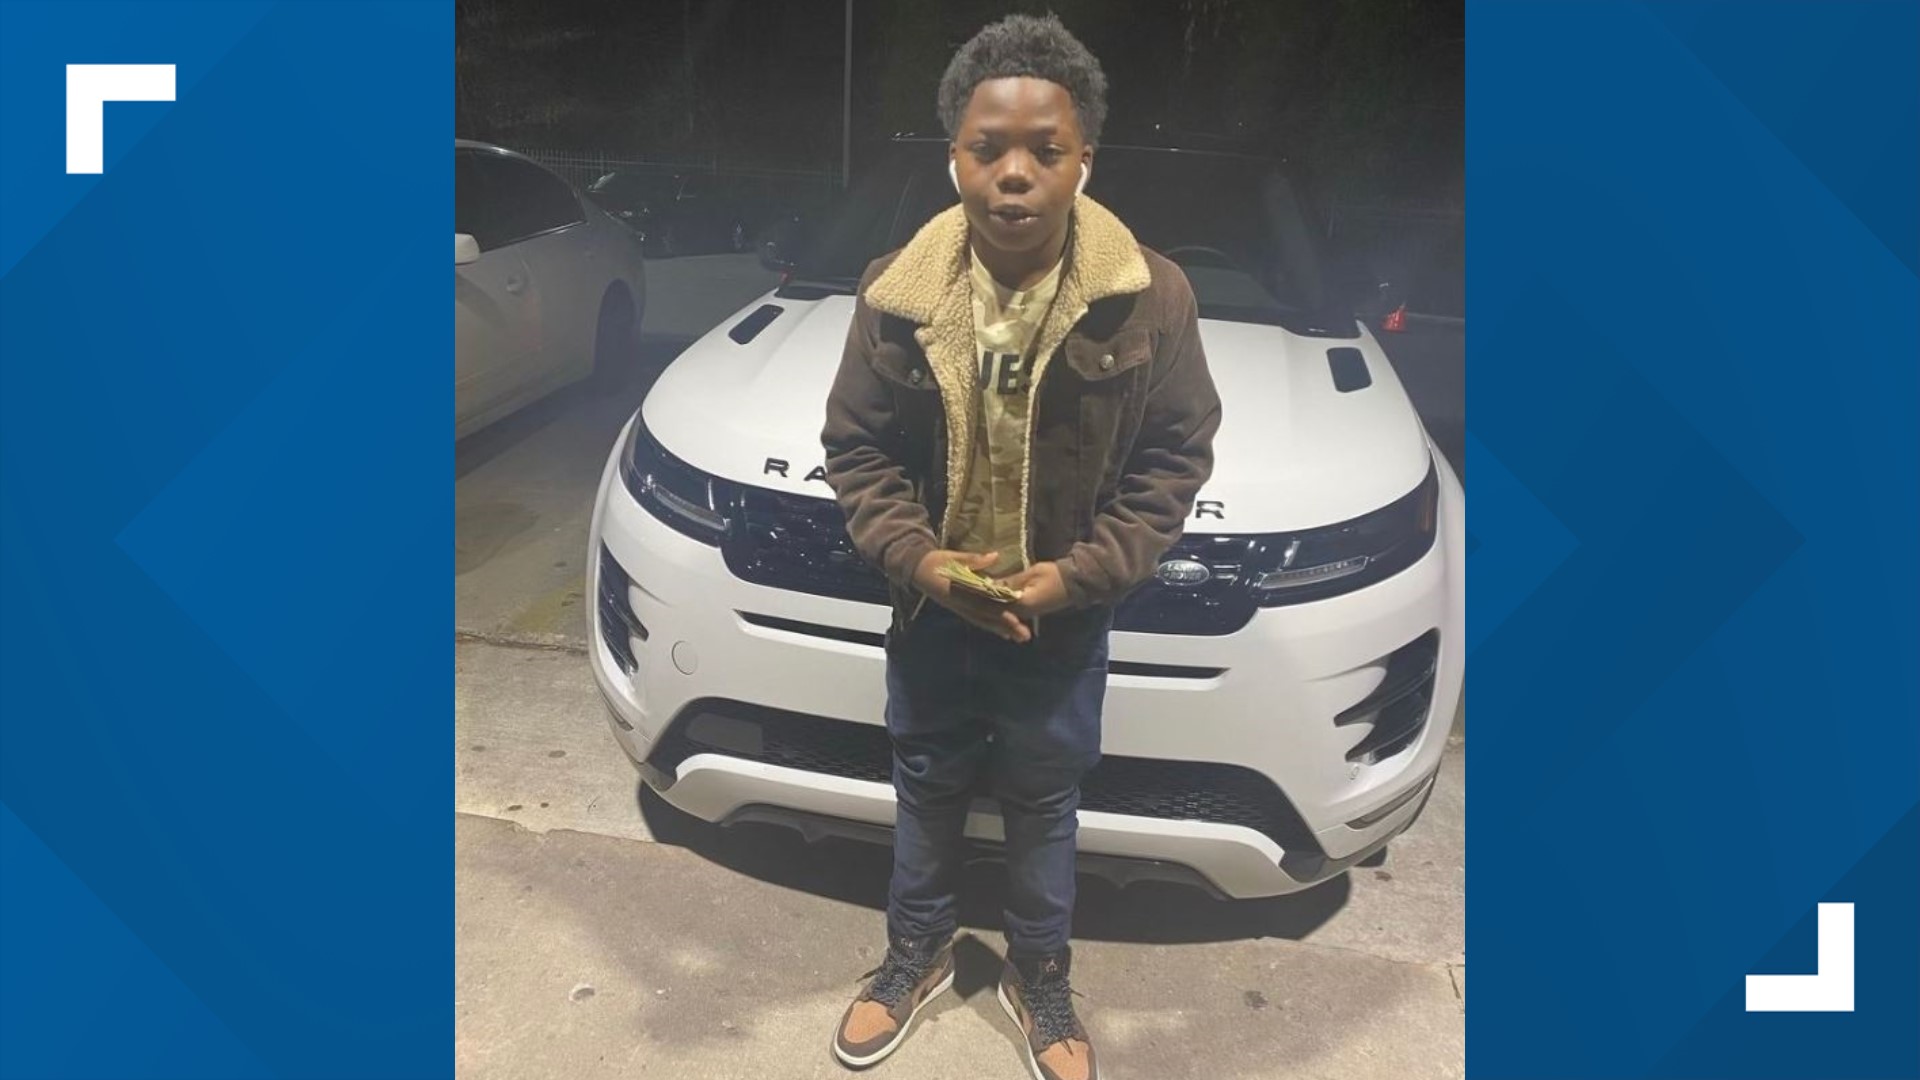 A 12-year-old boy who was shot and killed during a chaotic scene near Atlantic Station Saturday night has been identified by his family.